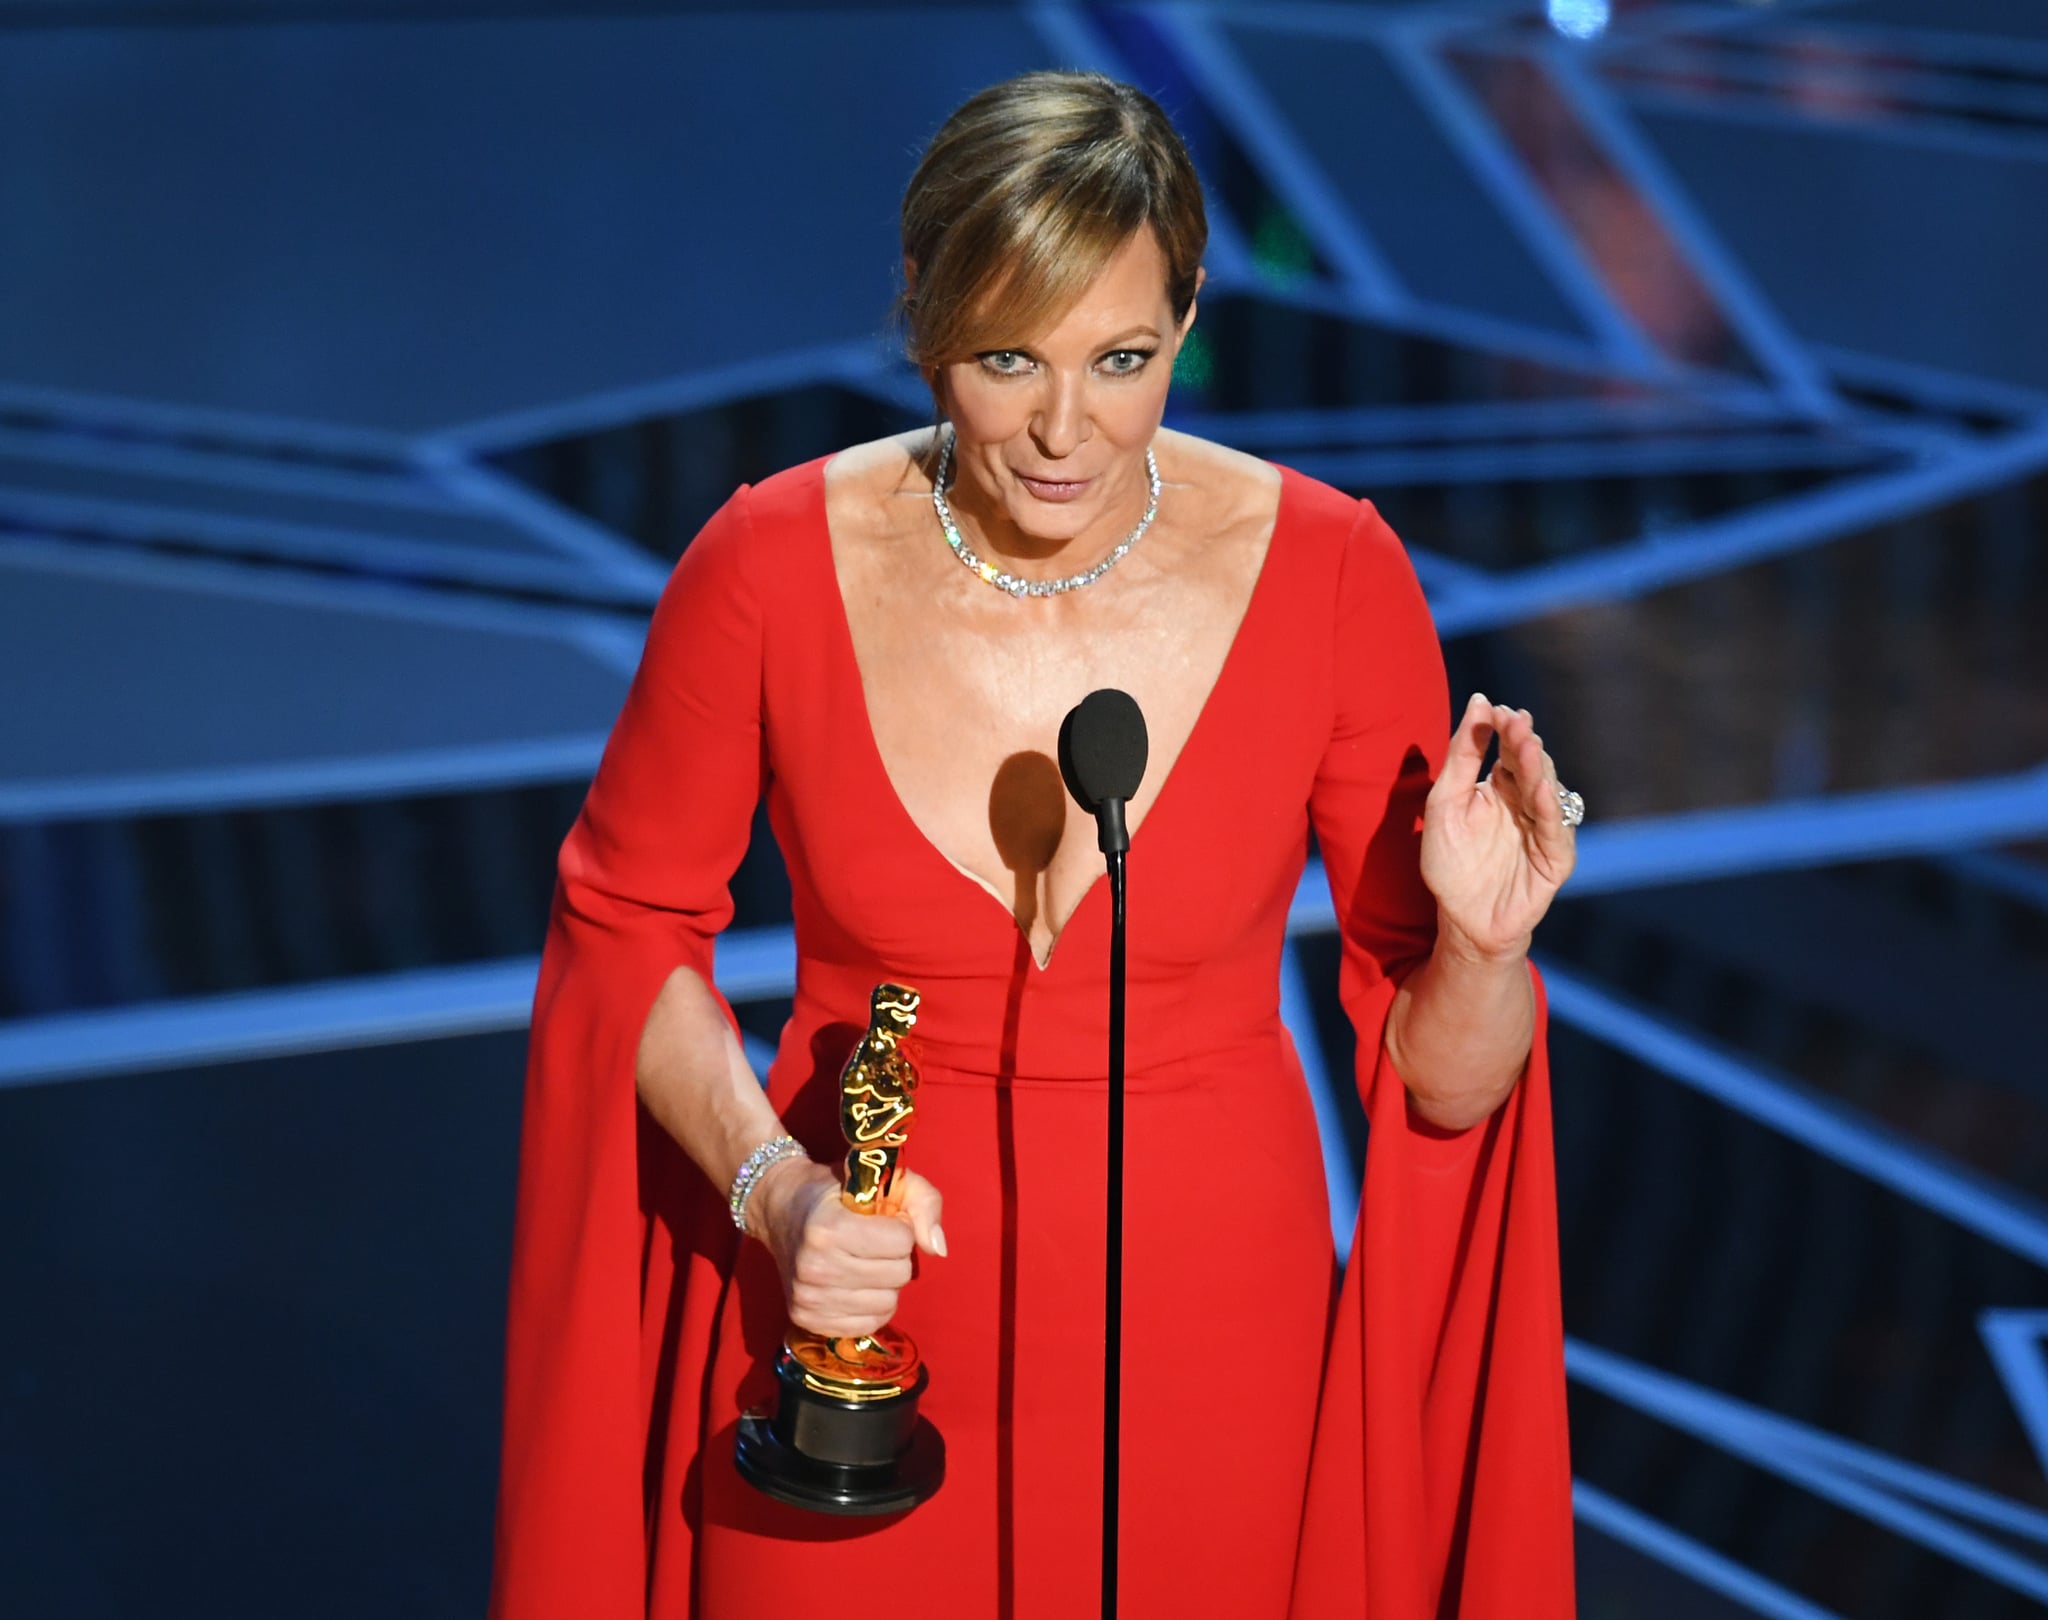 HOLLYWOOD, CA - MARCH 04:  Actor Allison Janney accepts Best Supporting Actress for 'I, Tonya' onstage during the 90th Annual Academy Awards at the Dolby Theatre at Hollywood & Highland Center on March 4, 2018 in Hollywood, California.  (Photo by Kevin Winter/Getty Images)